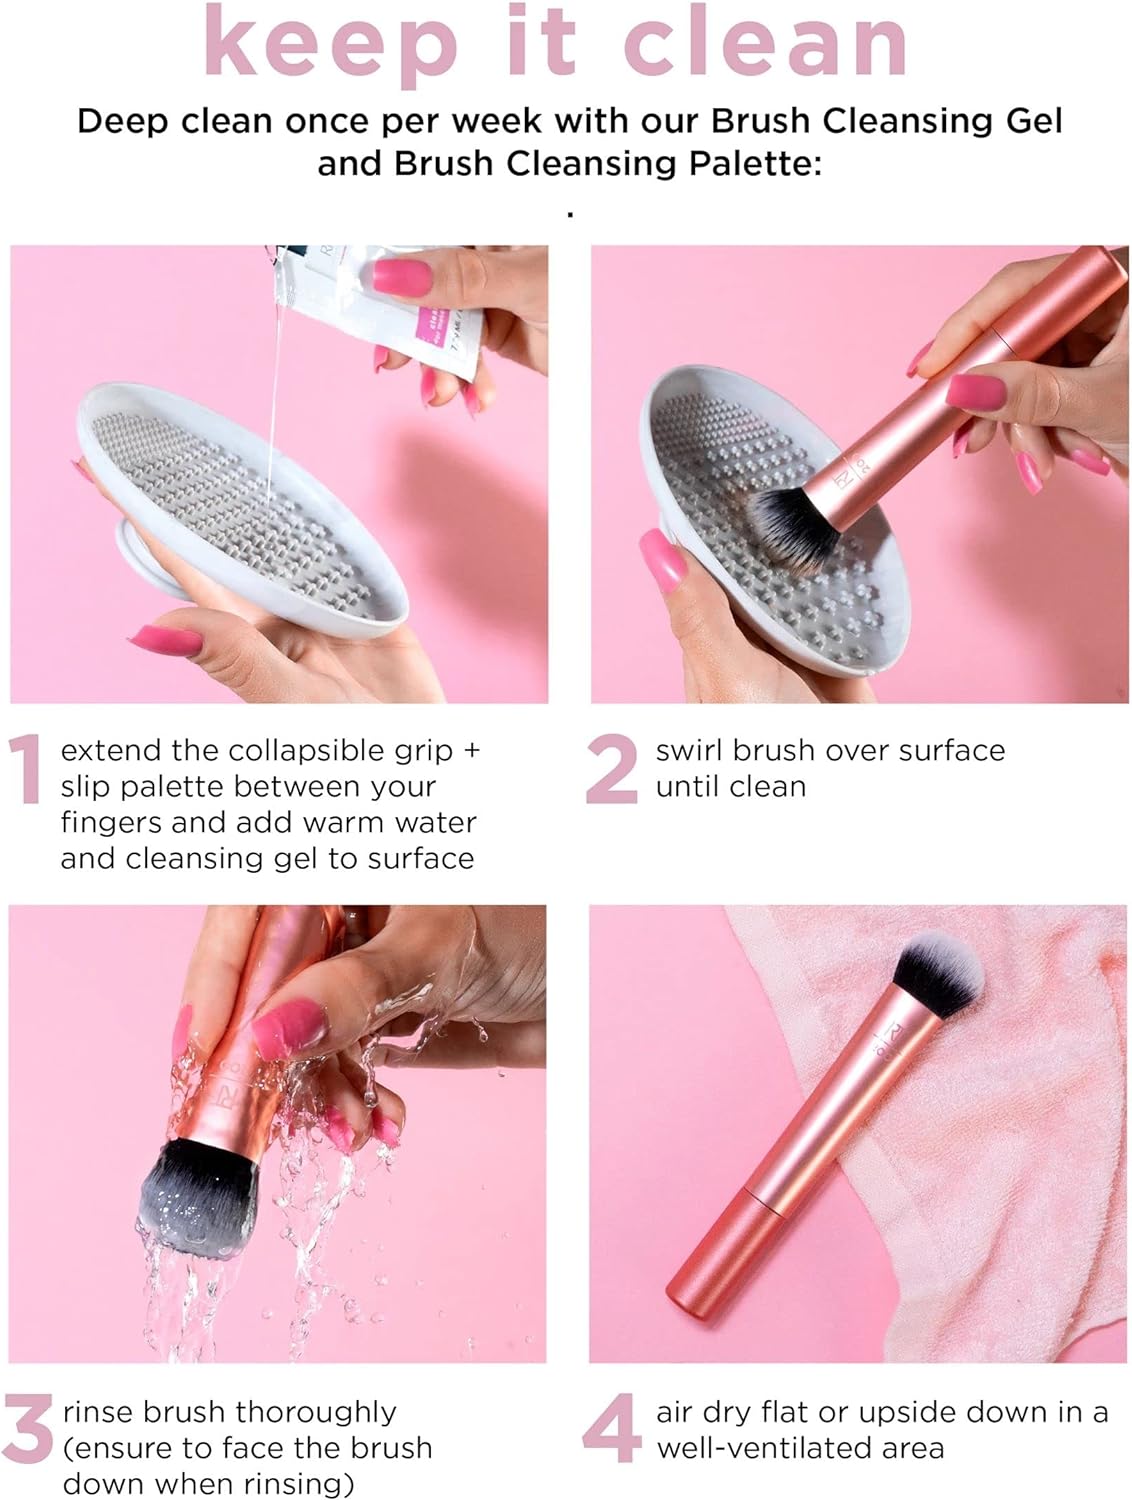 Real Techniques Expert Face Makeup Brush